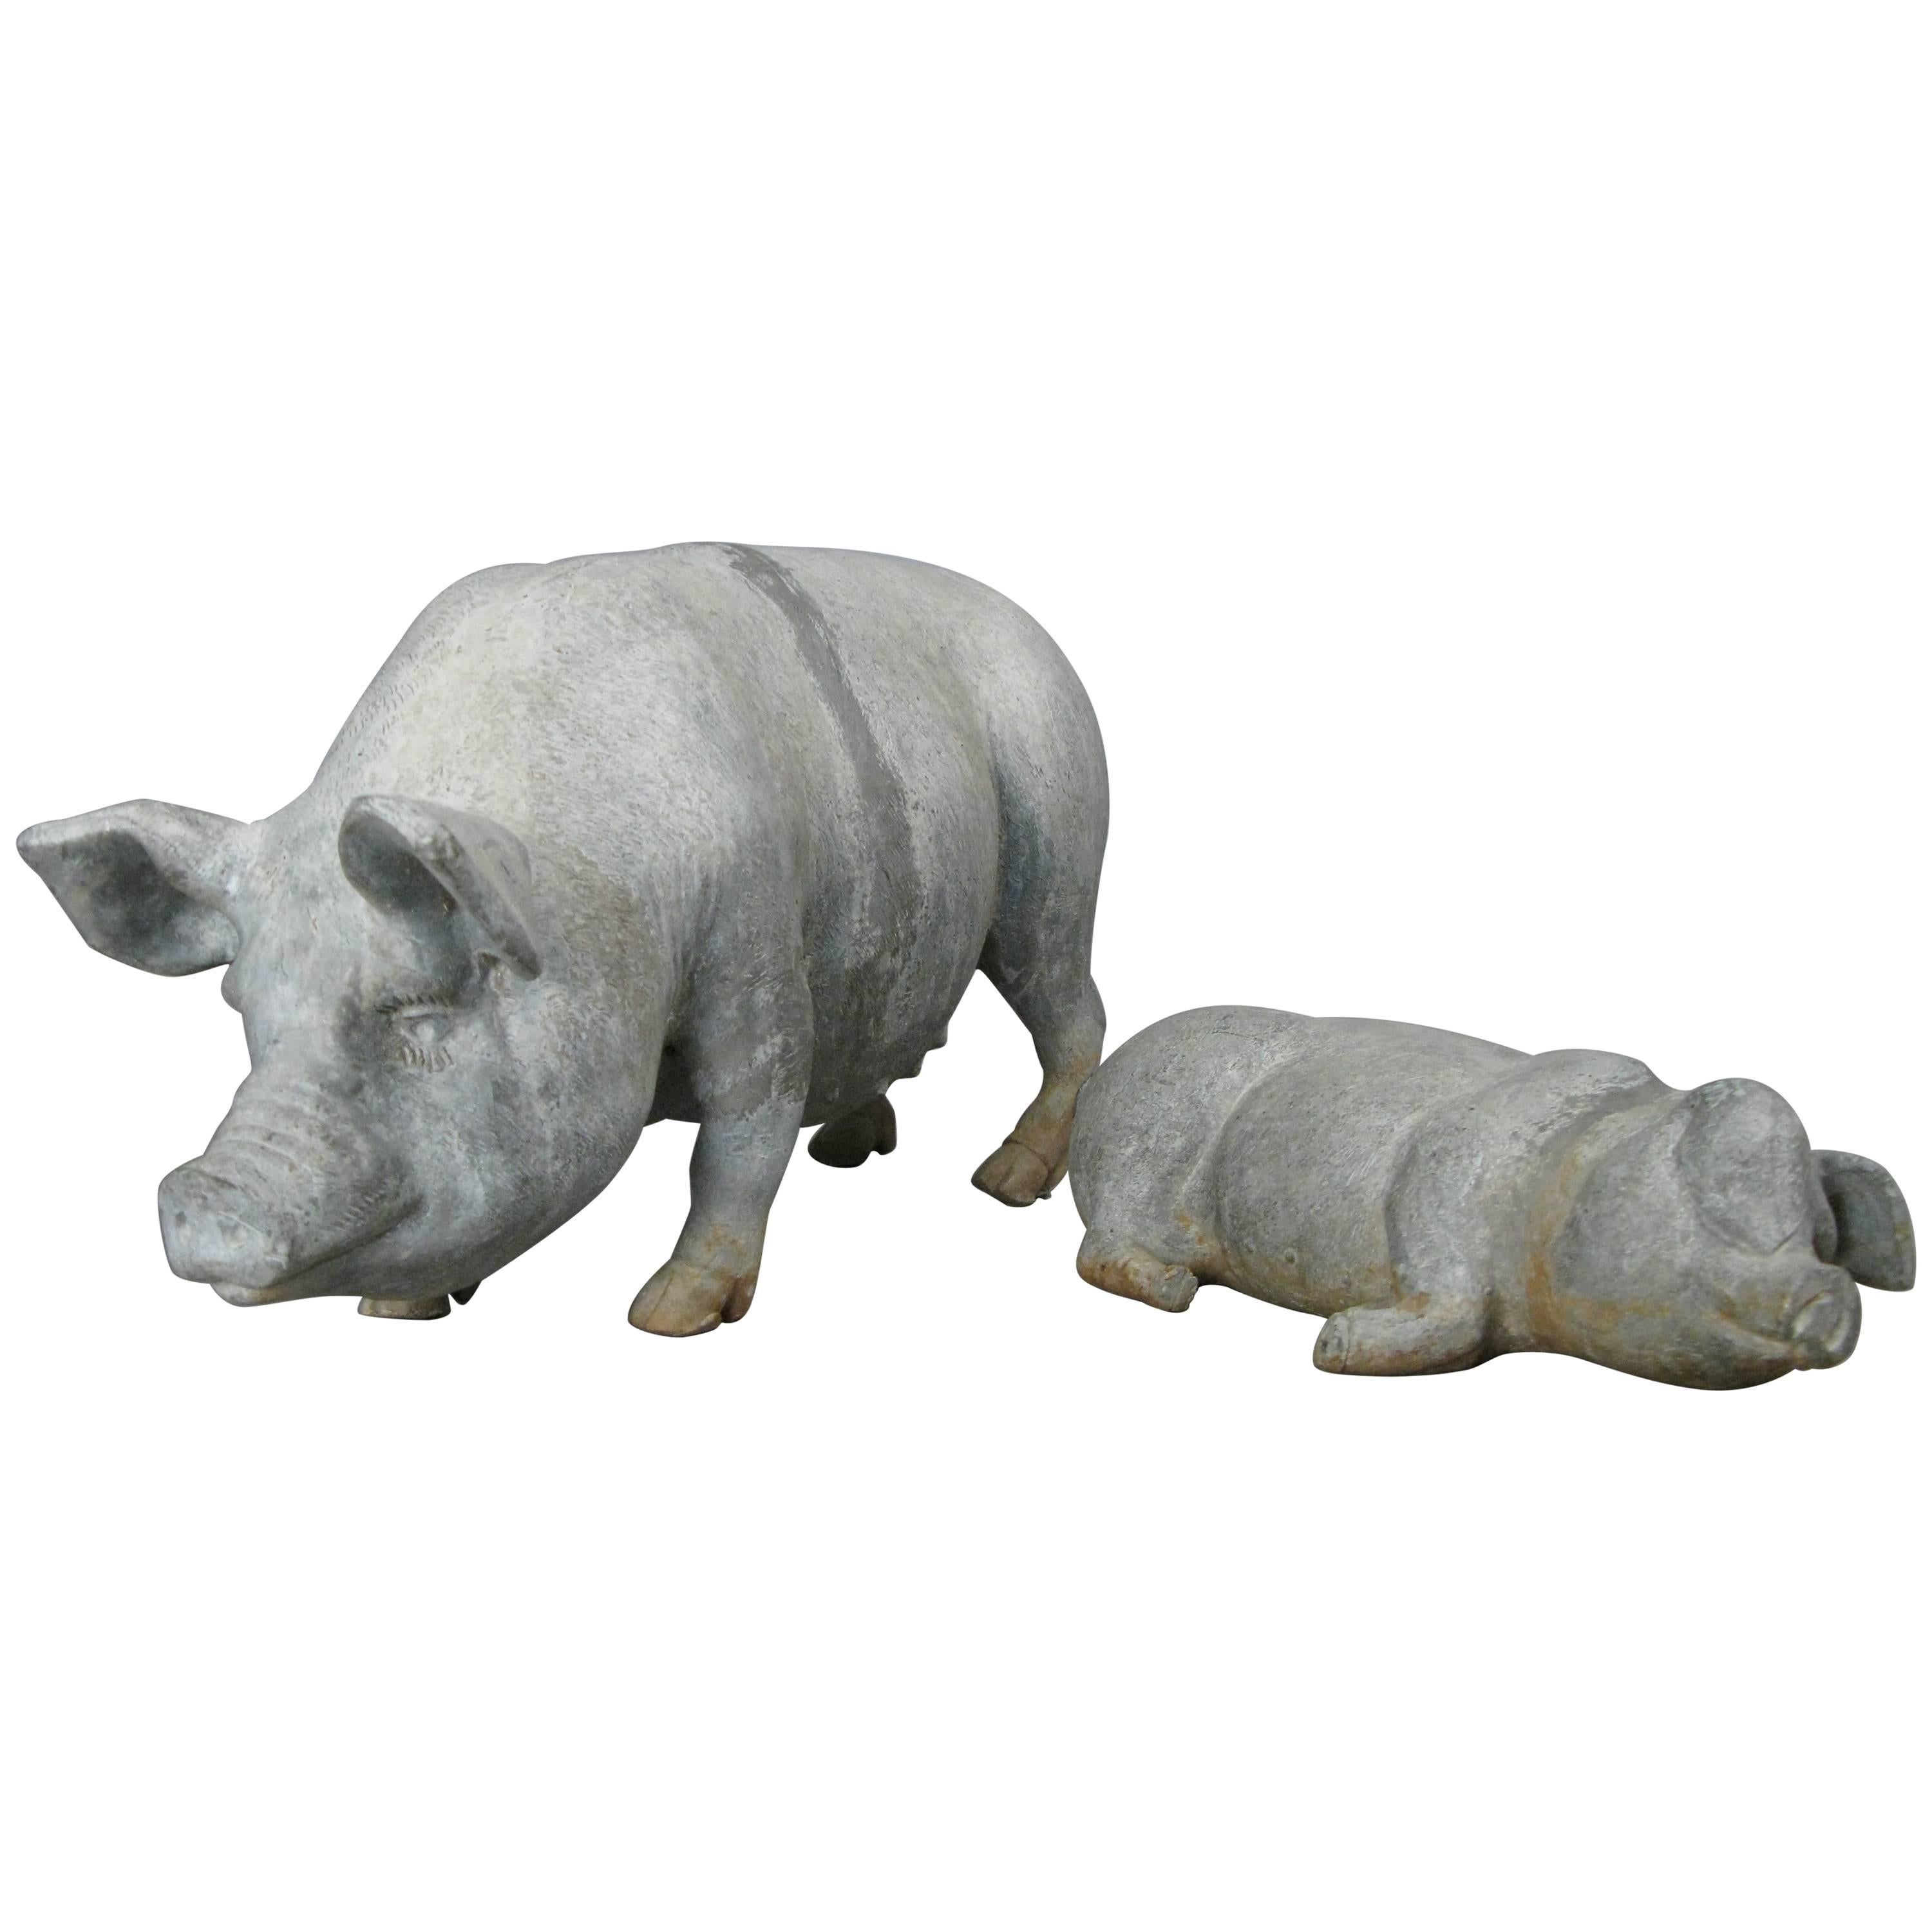 English Lead Garden Pig and Piglet